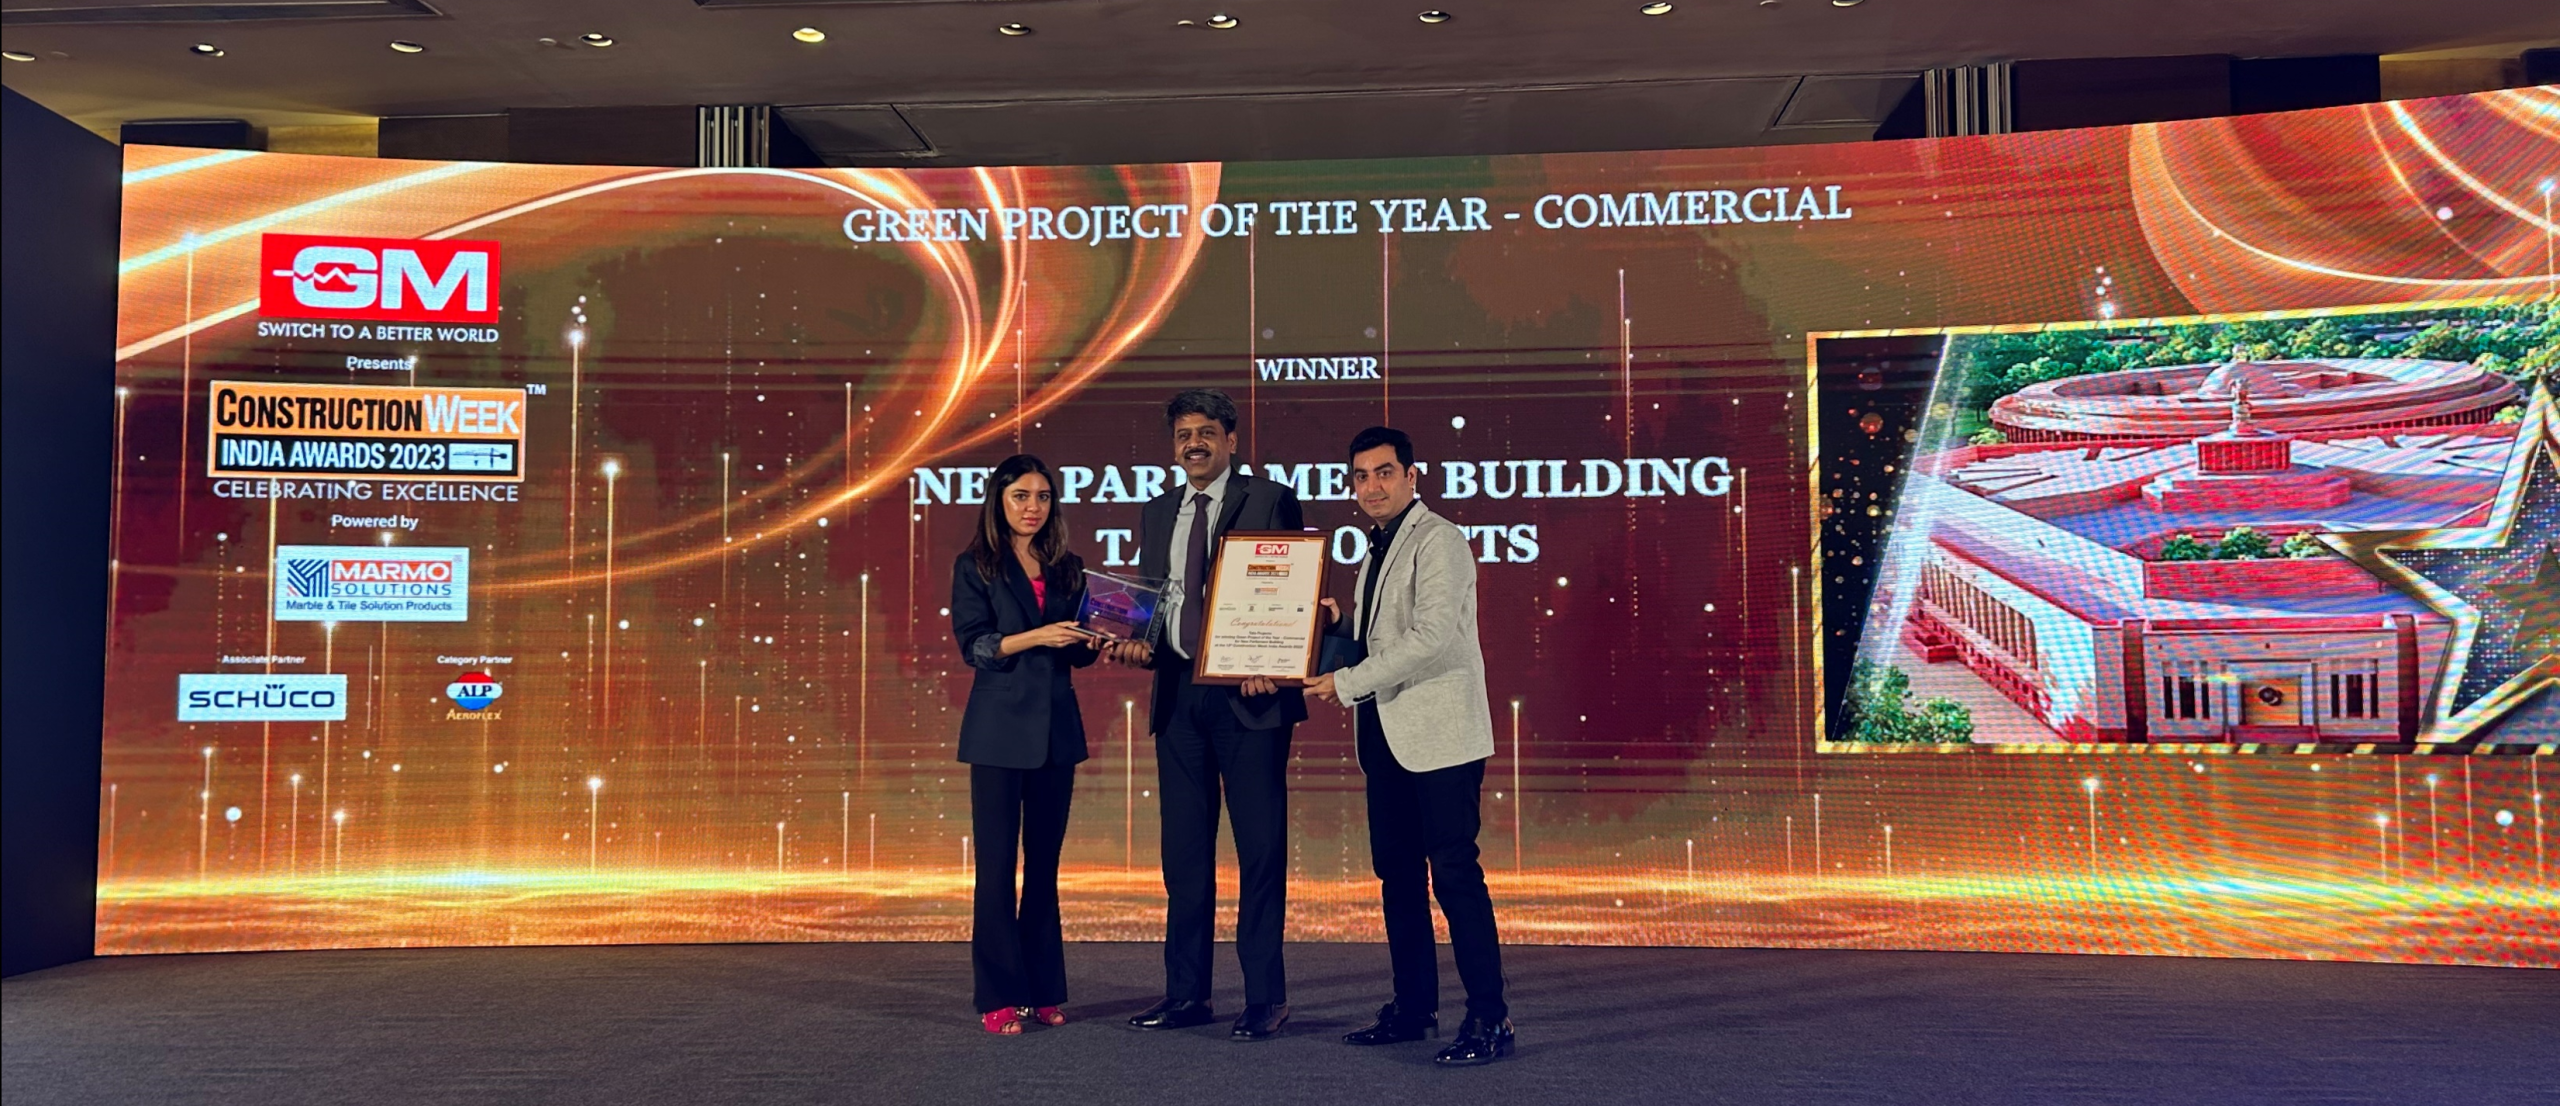 New Parliament Building Green Project of the year by Construction Week India